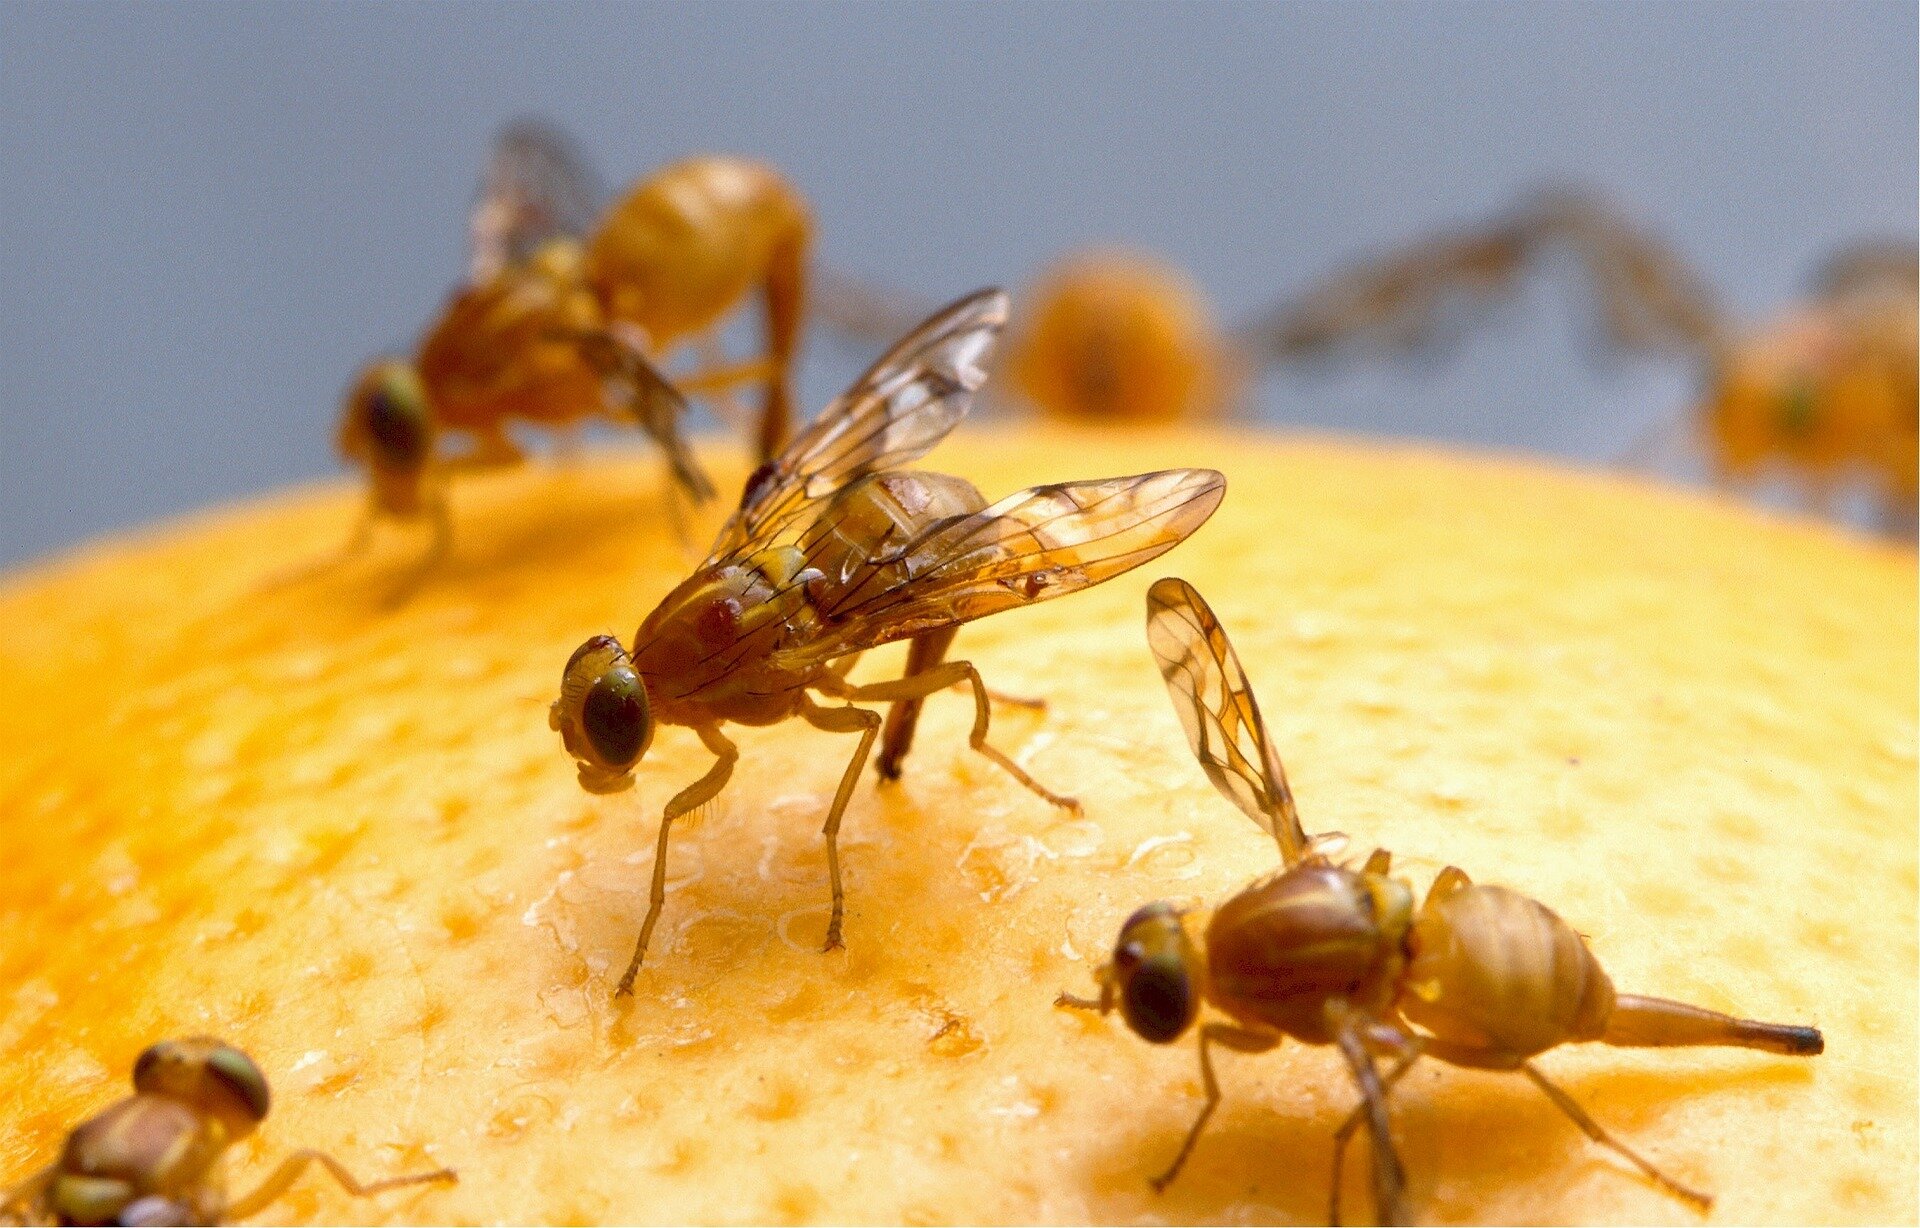 Fruit Flies Are Invading Los Angeles. The Solution? More Fruit